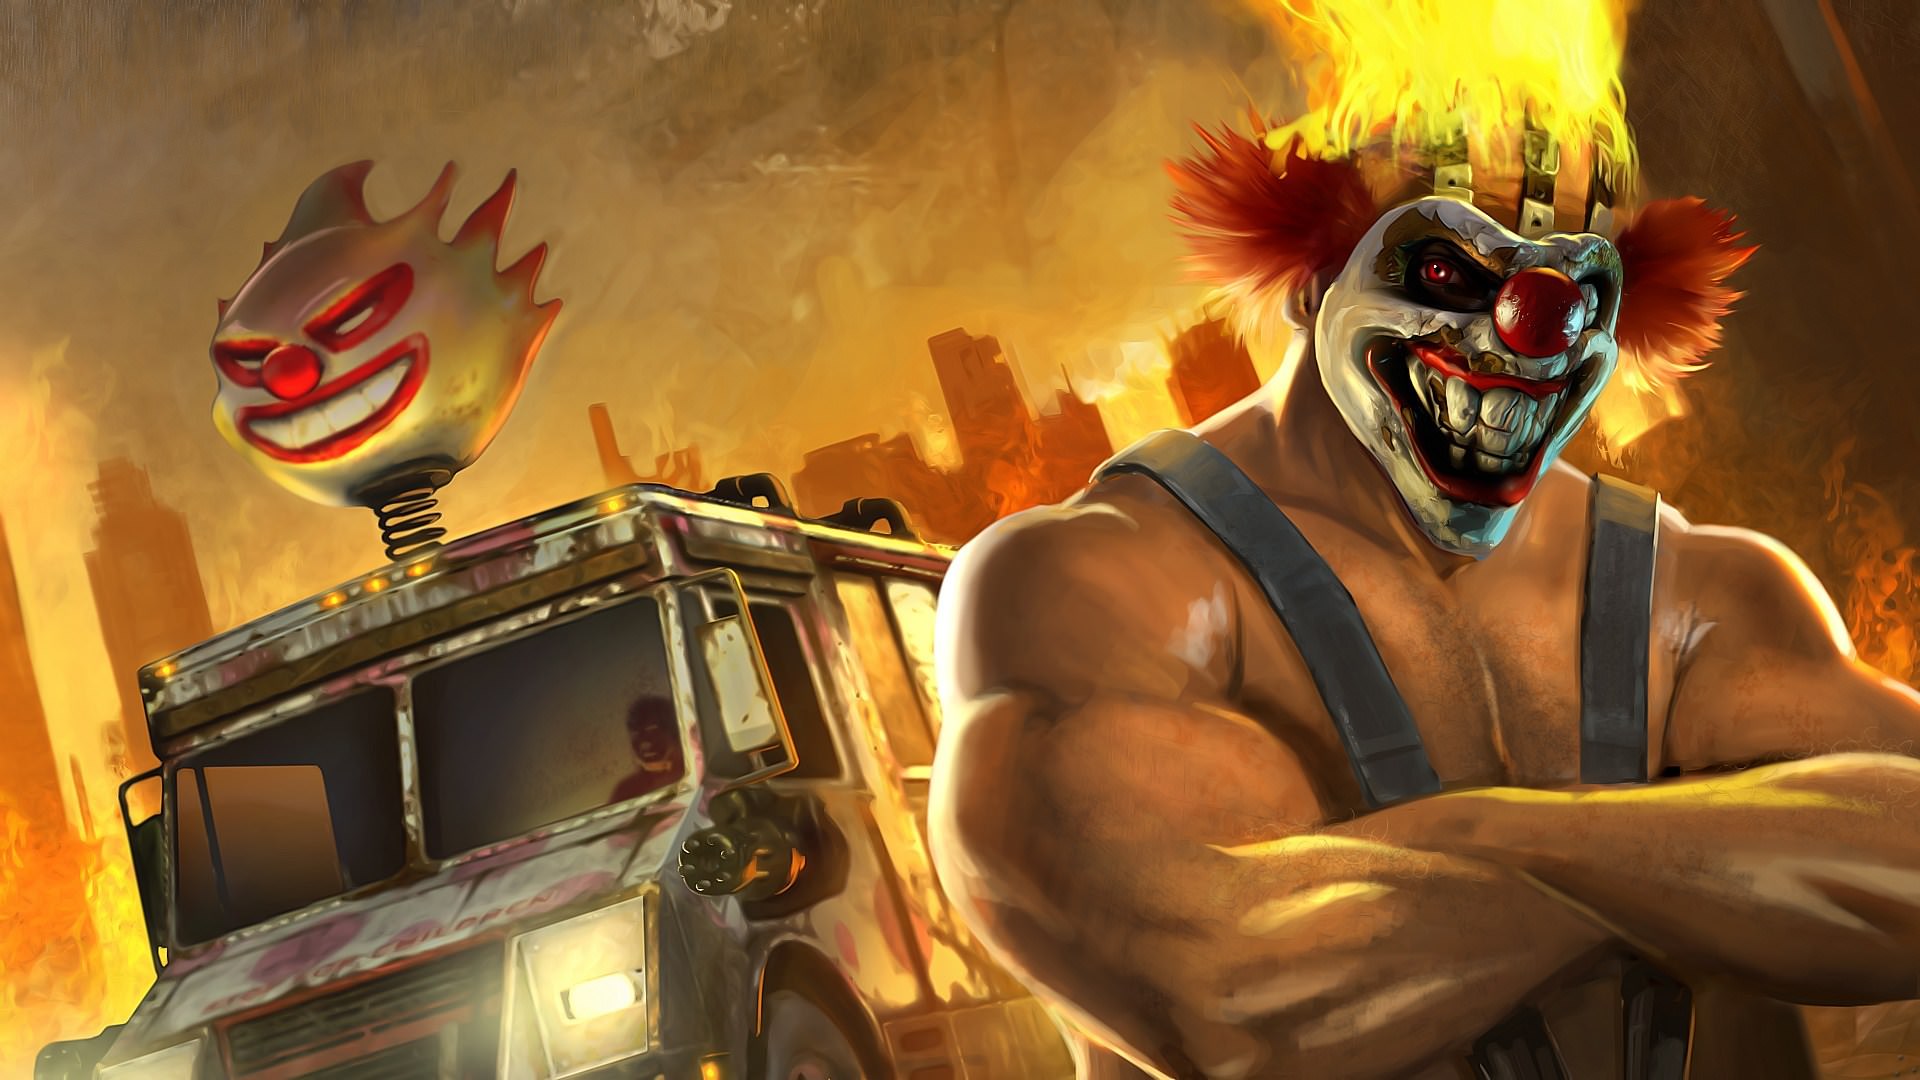 Image of Tom Henderson's new tweet about the Twisted Metal series